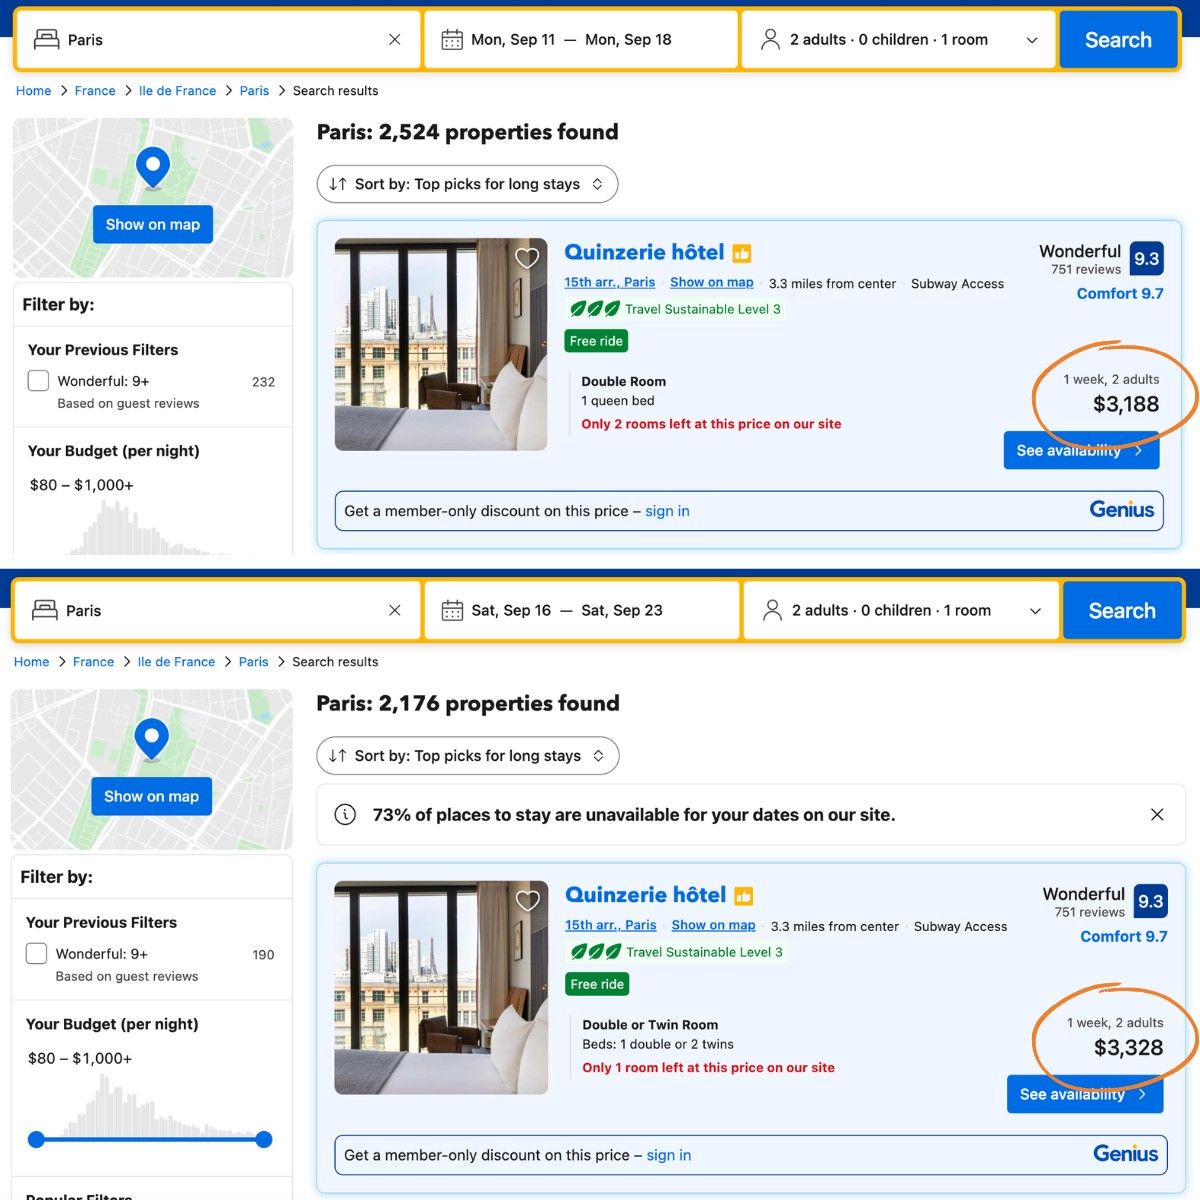 Having flexible dates will result in being able to find cheaper hotels like in this screenshot showing hotel prices from saturday to saturday versus monday to monday